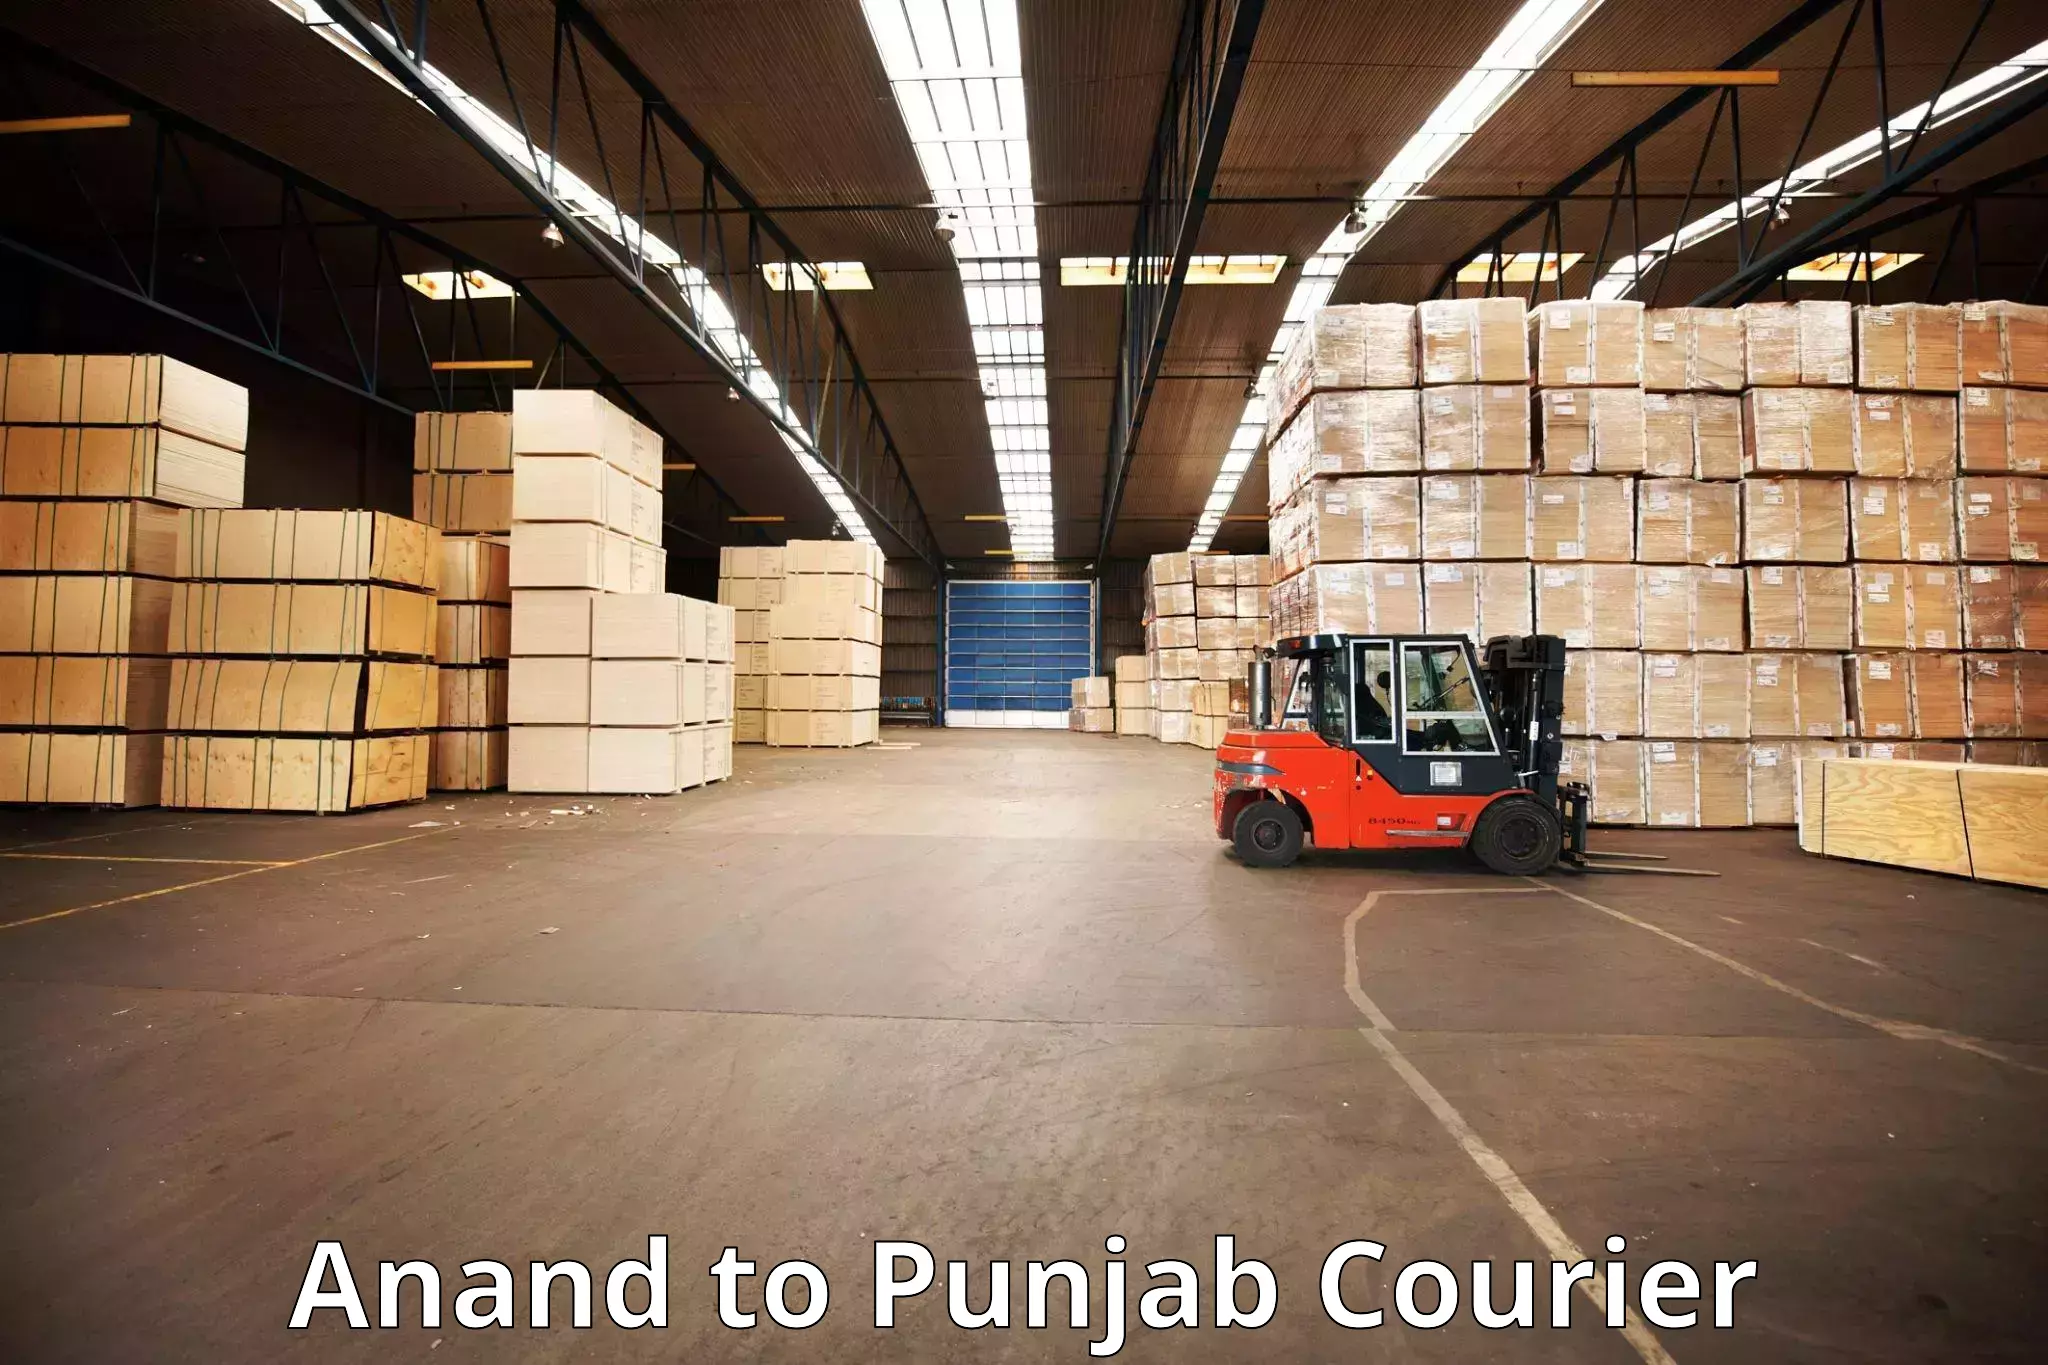 Luggage transport consultancy Anand to Patiala